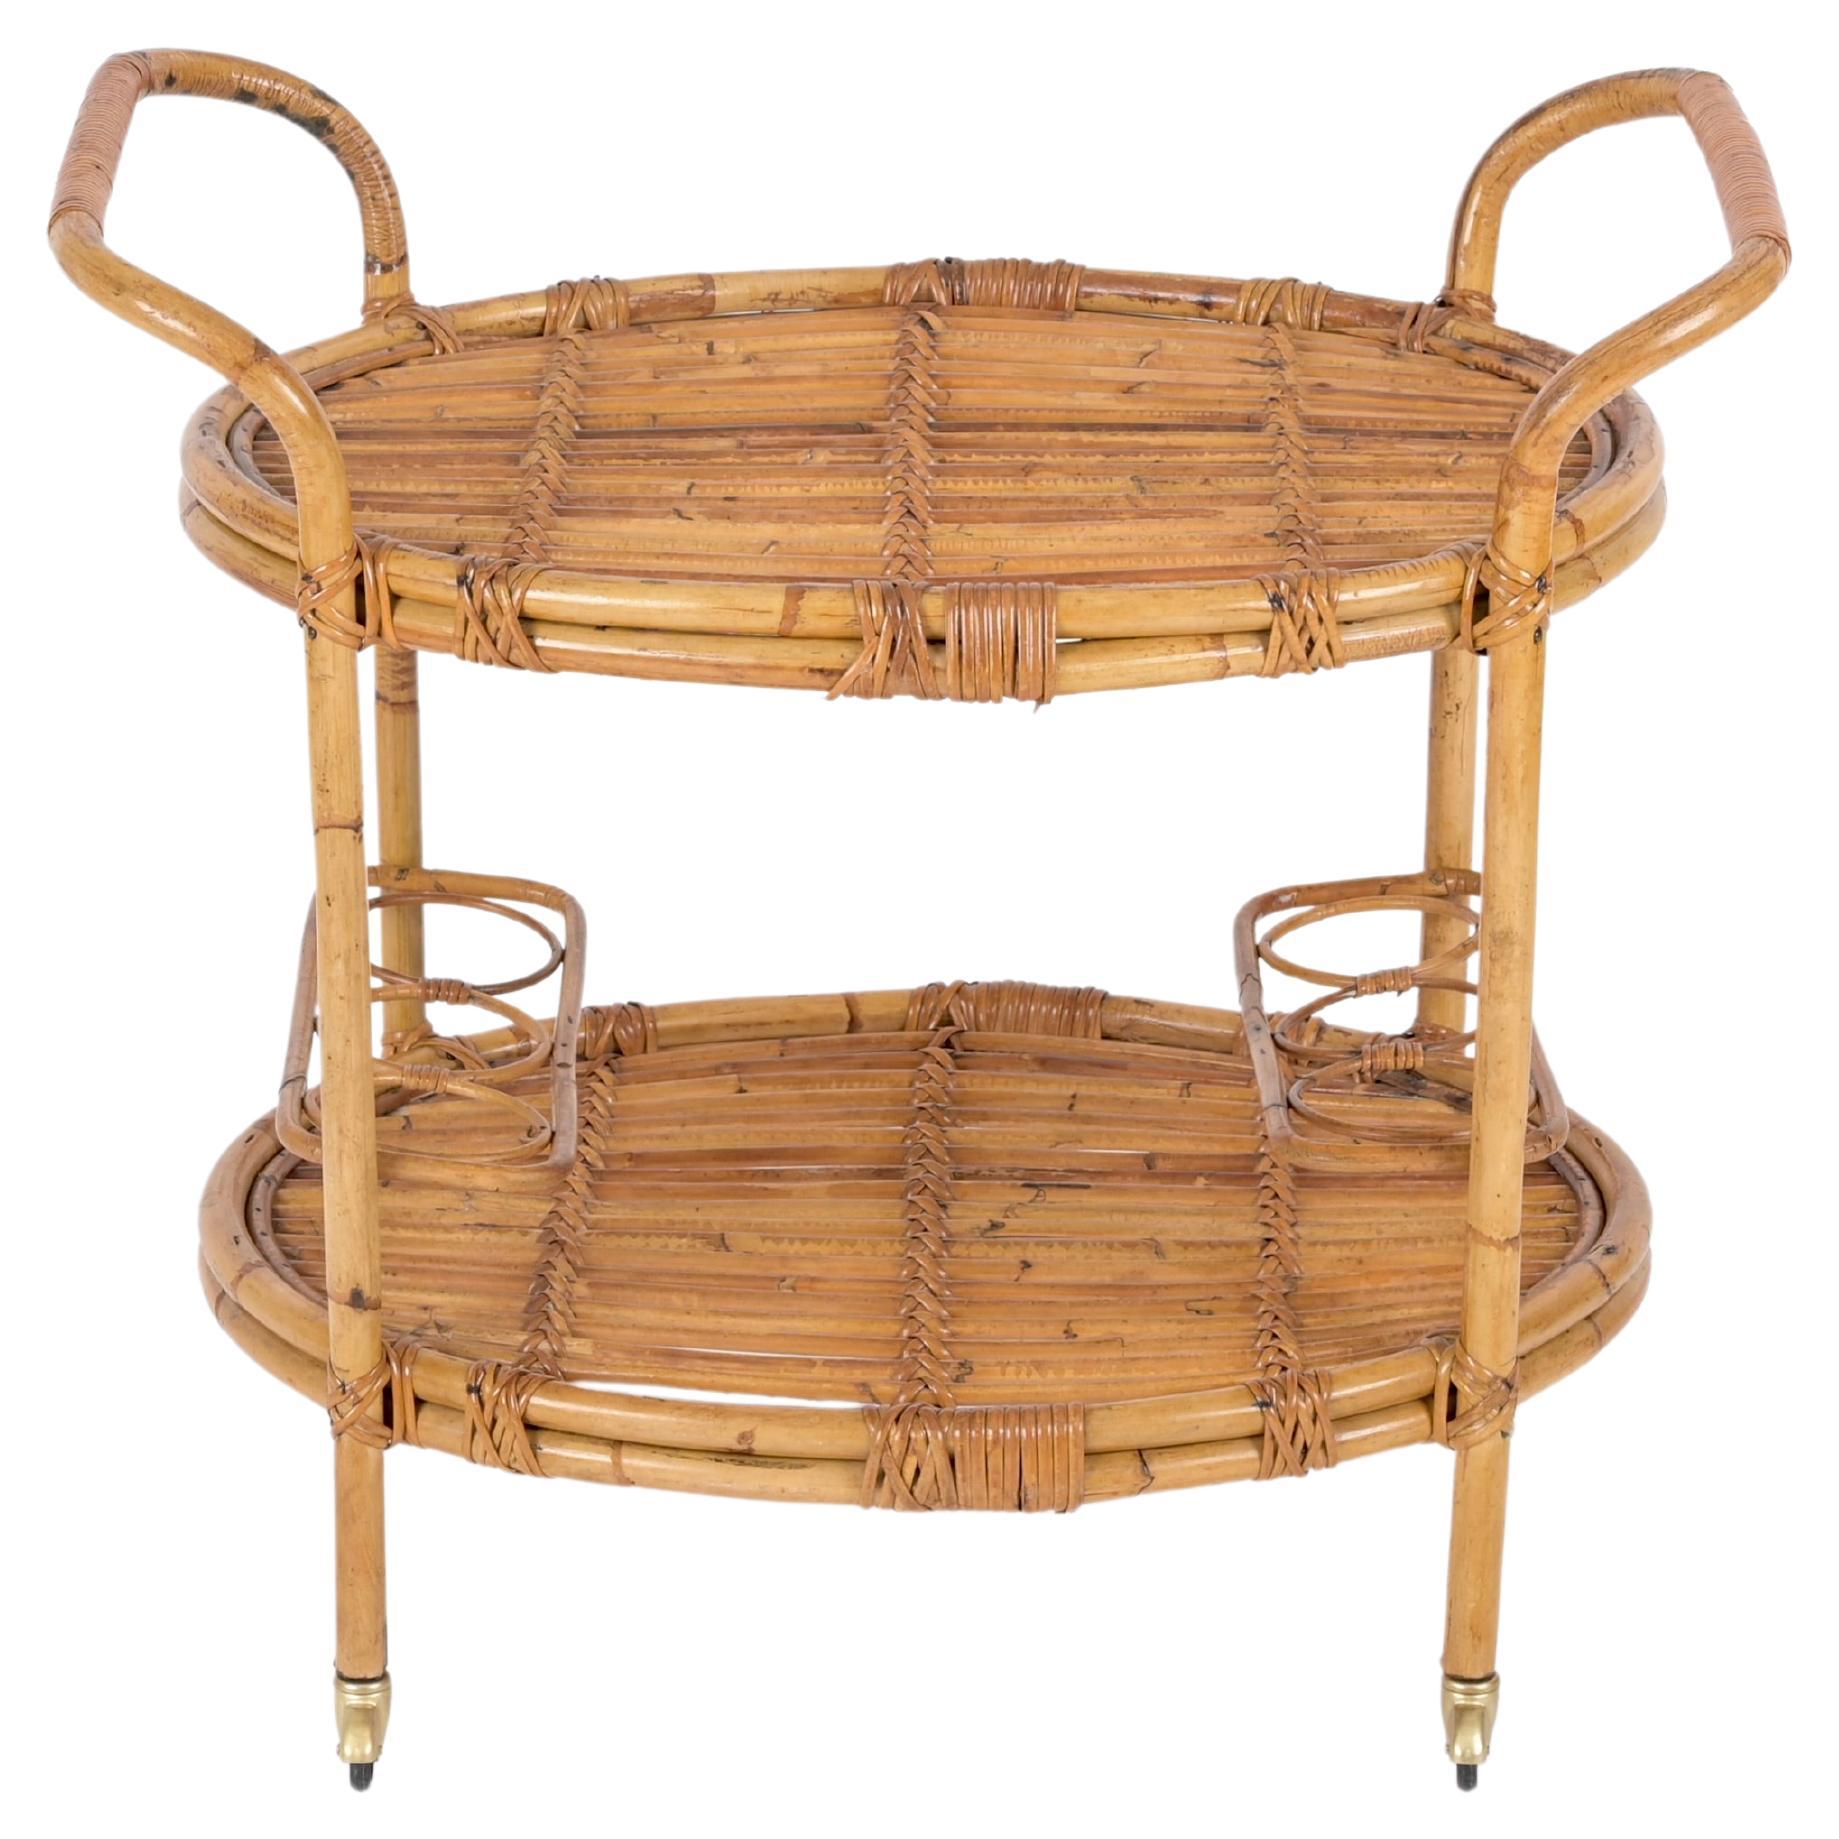 Mid-Century Italian Bamboo and Rattan Oval Serving Bar Cart Trolley, 1960s